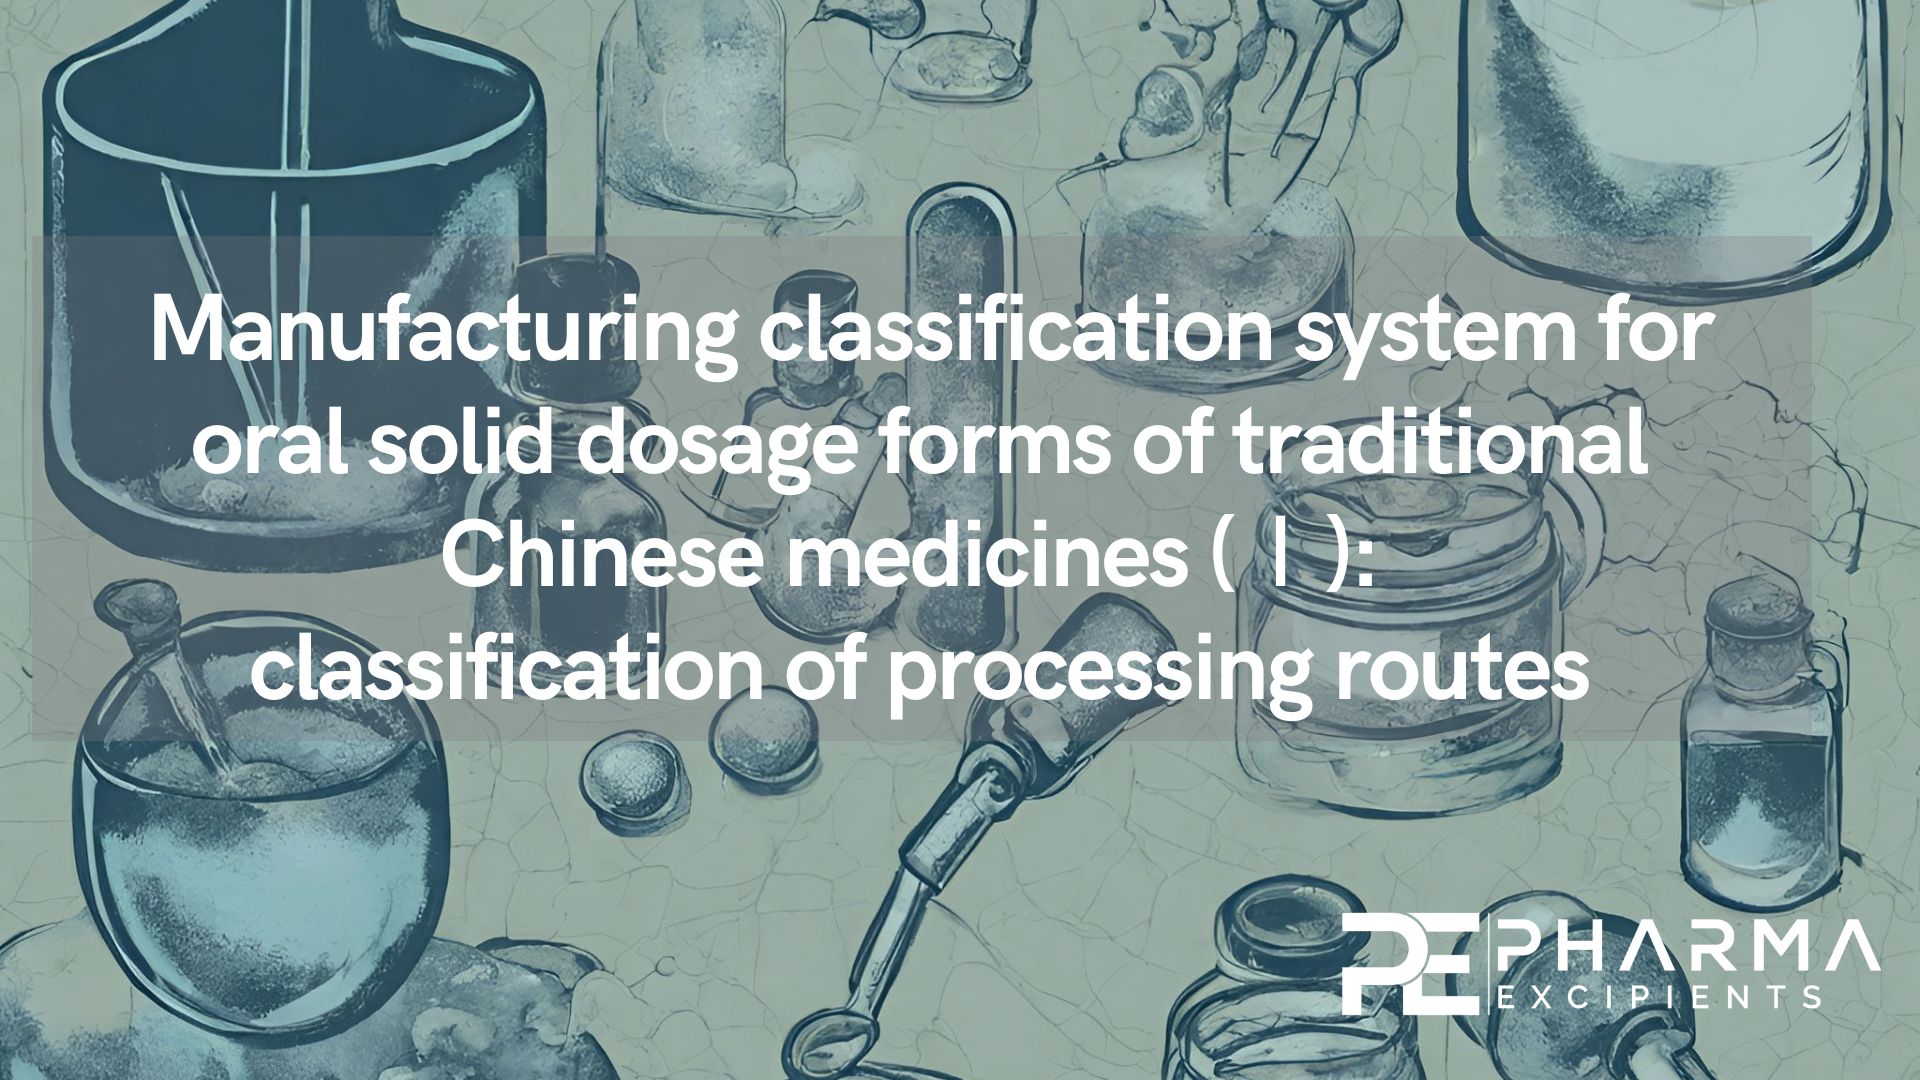 Manufacturing classification system for oral solid dosage forms of traditional Chinese medicines(Ⅰ): classification of processing routes